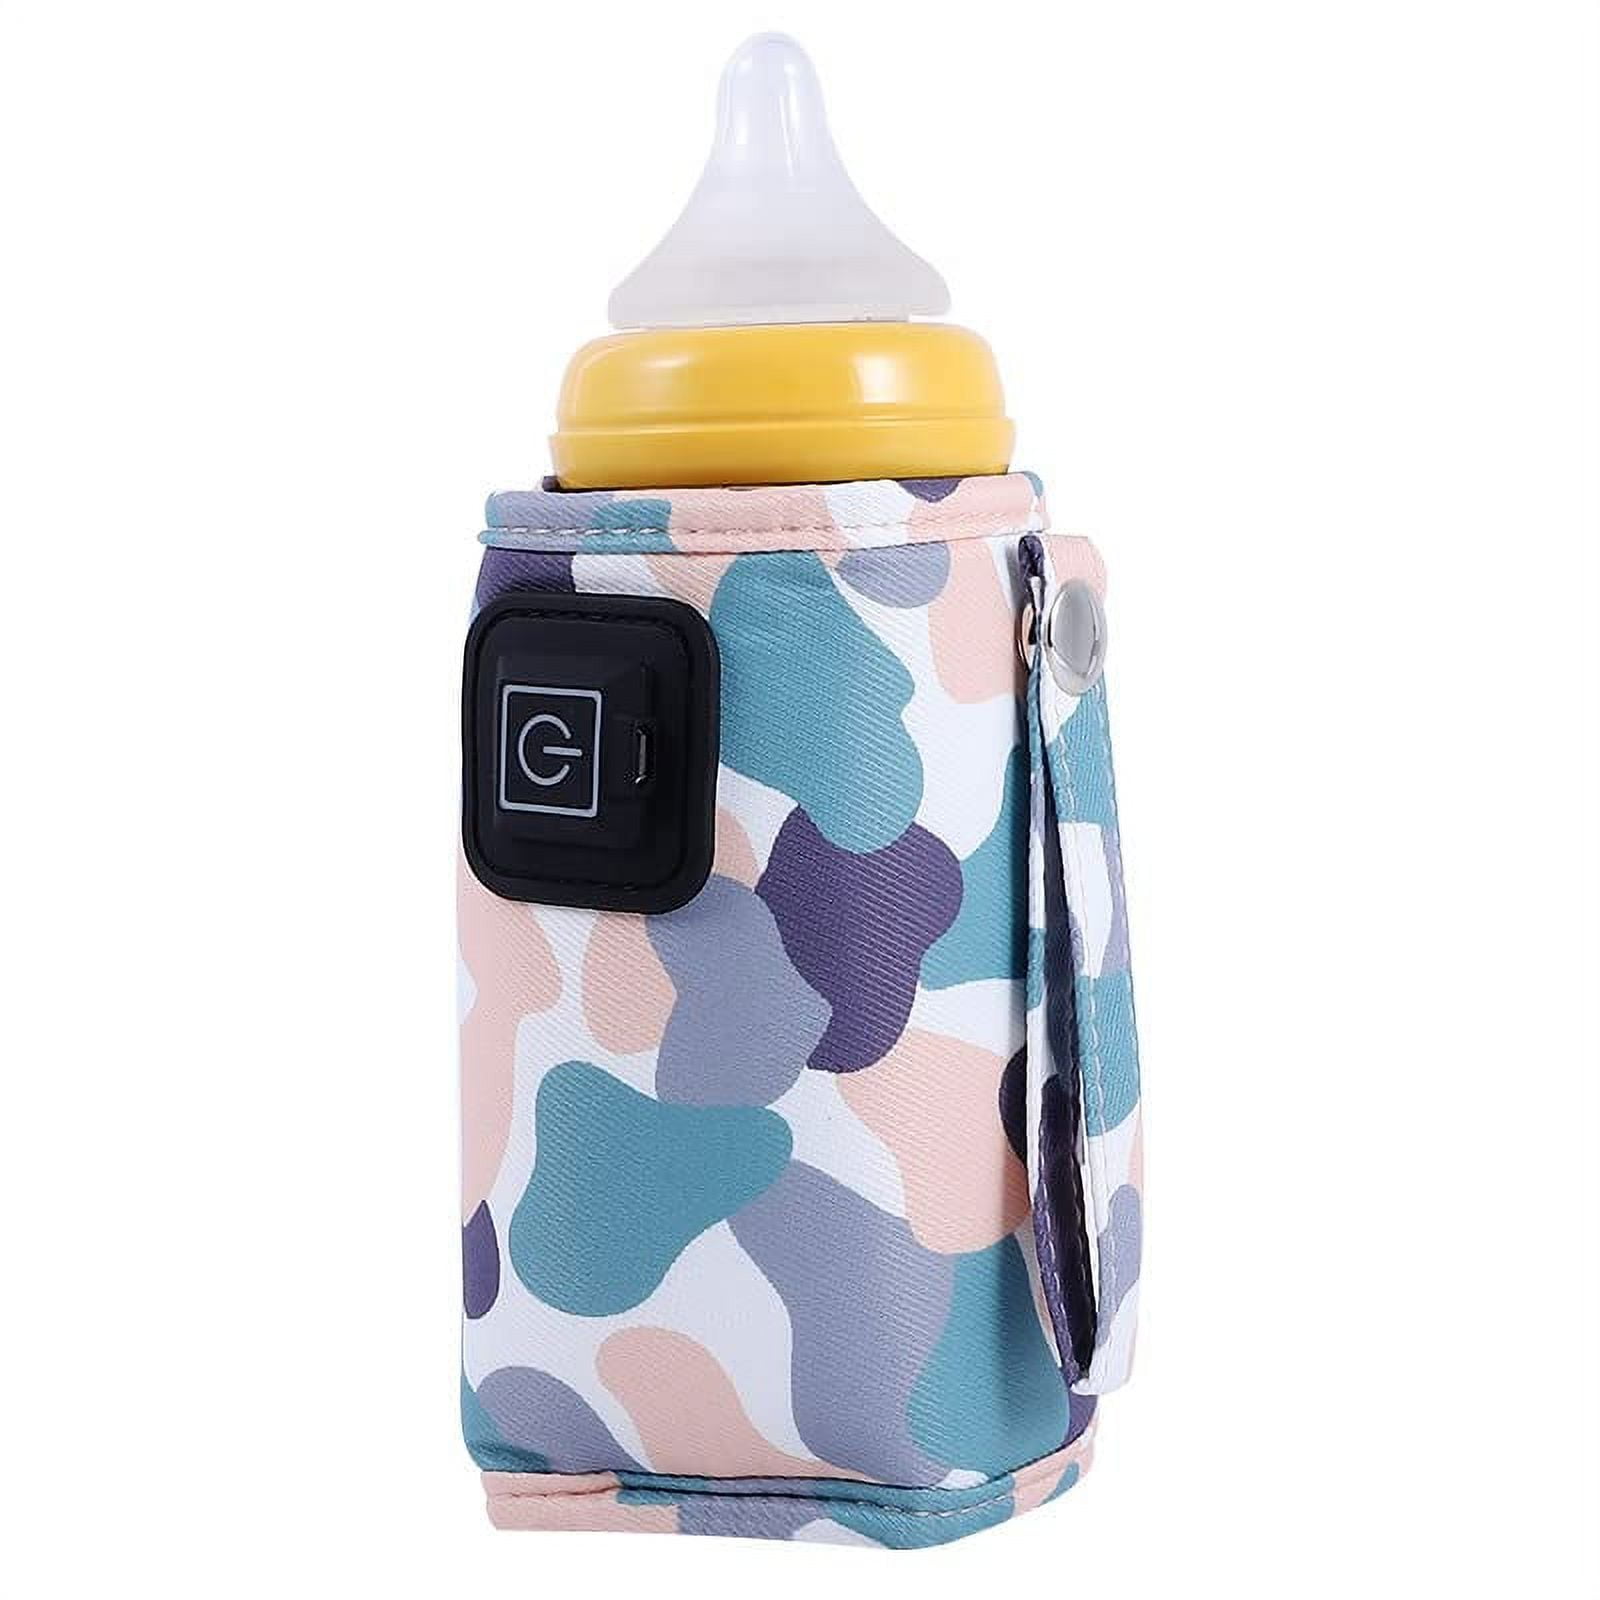 Baby Products Online - Portable Digital Baby Food Warmer Baby Bottle Warmer  Mini Oven Car Food Warmer Pre-set Temperature Car Heating Lunch Box - Kideno